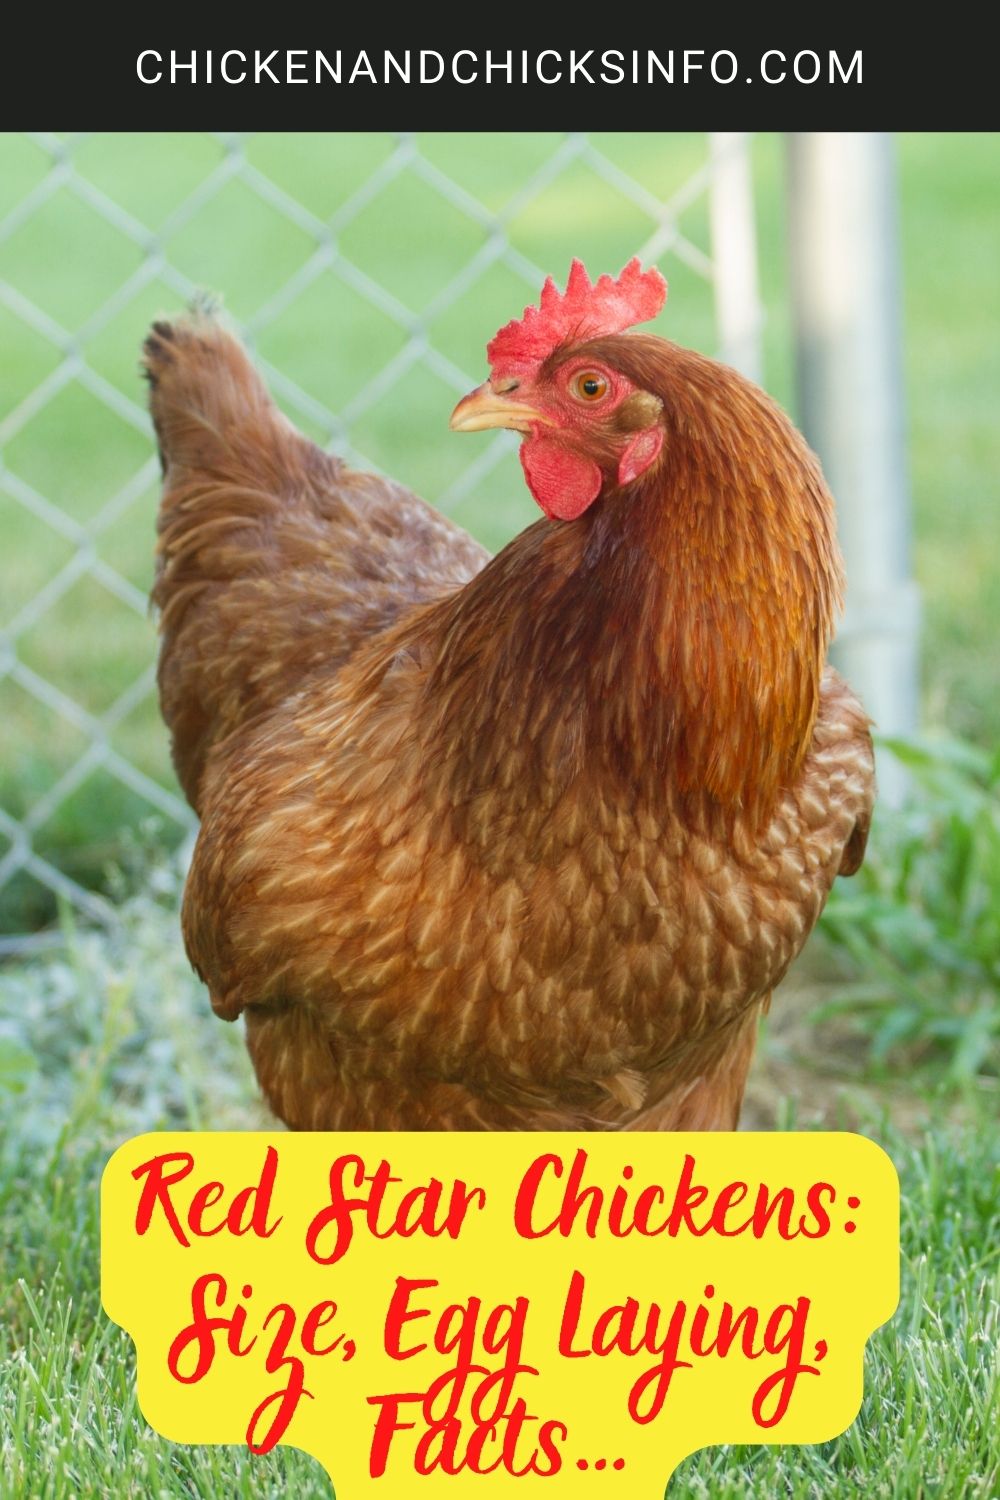 Red Star Chickens Size, Egg Laying, Facts… poster.
